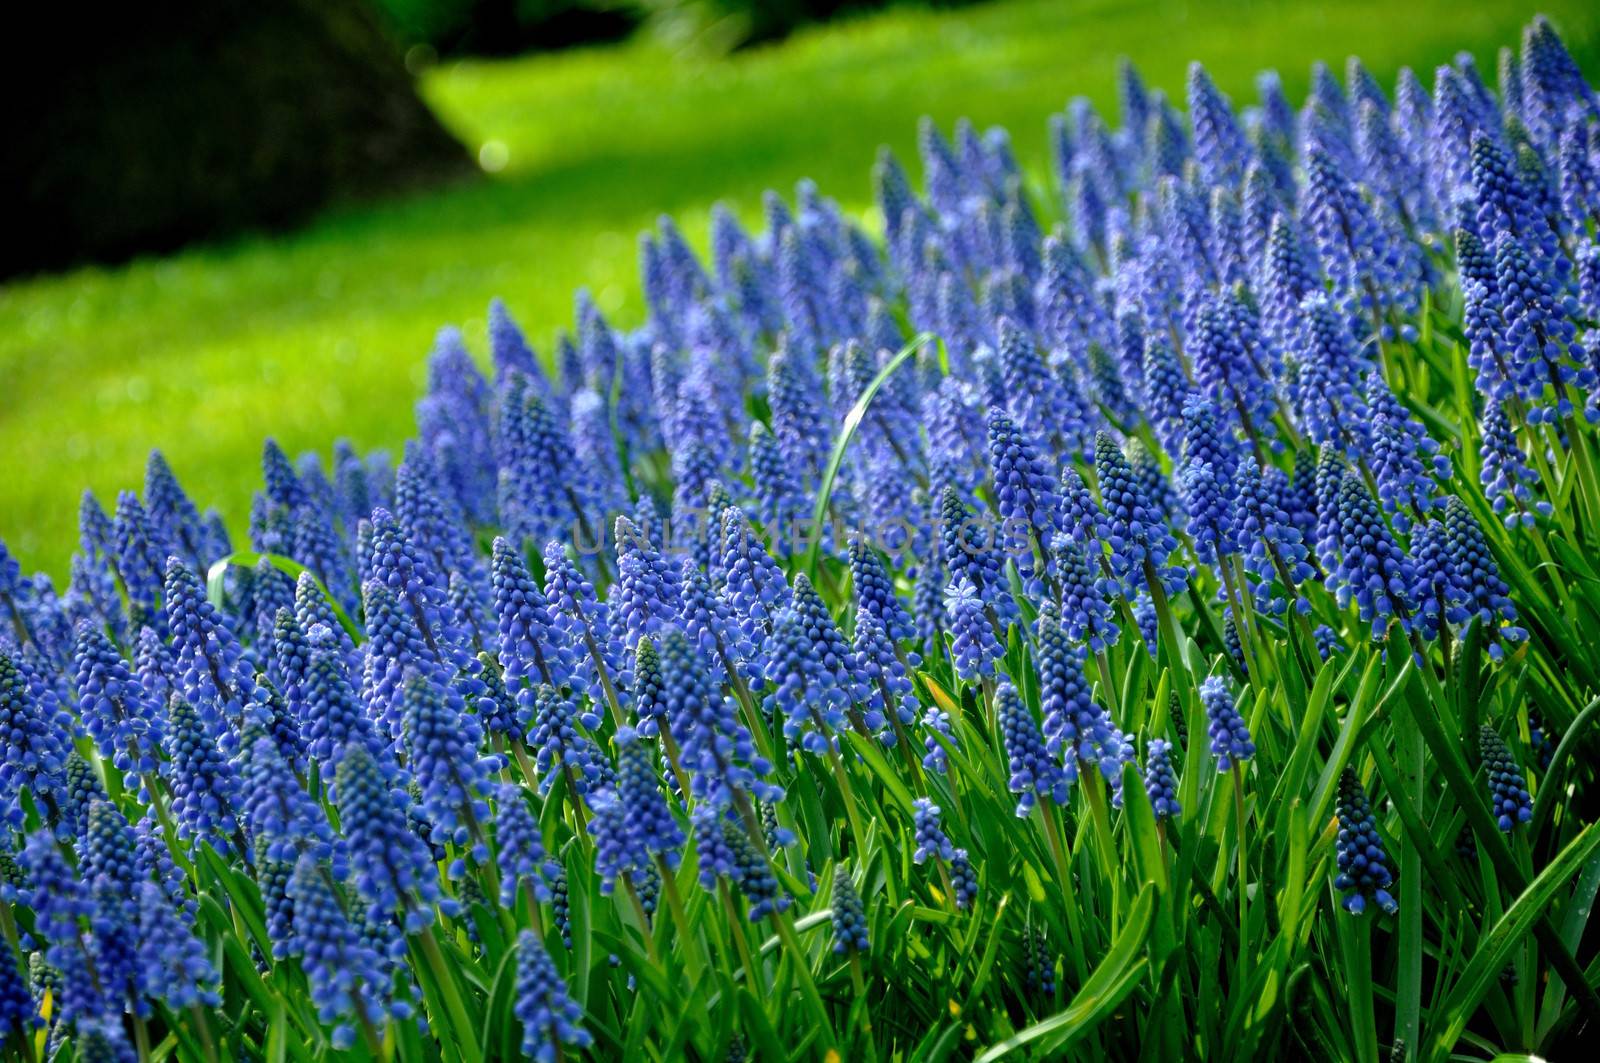 Grape Hyacinth with green grass in Keukenhof park in Holland by Eagle2308